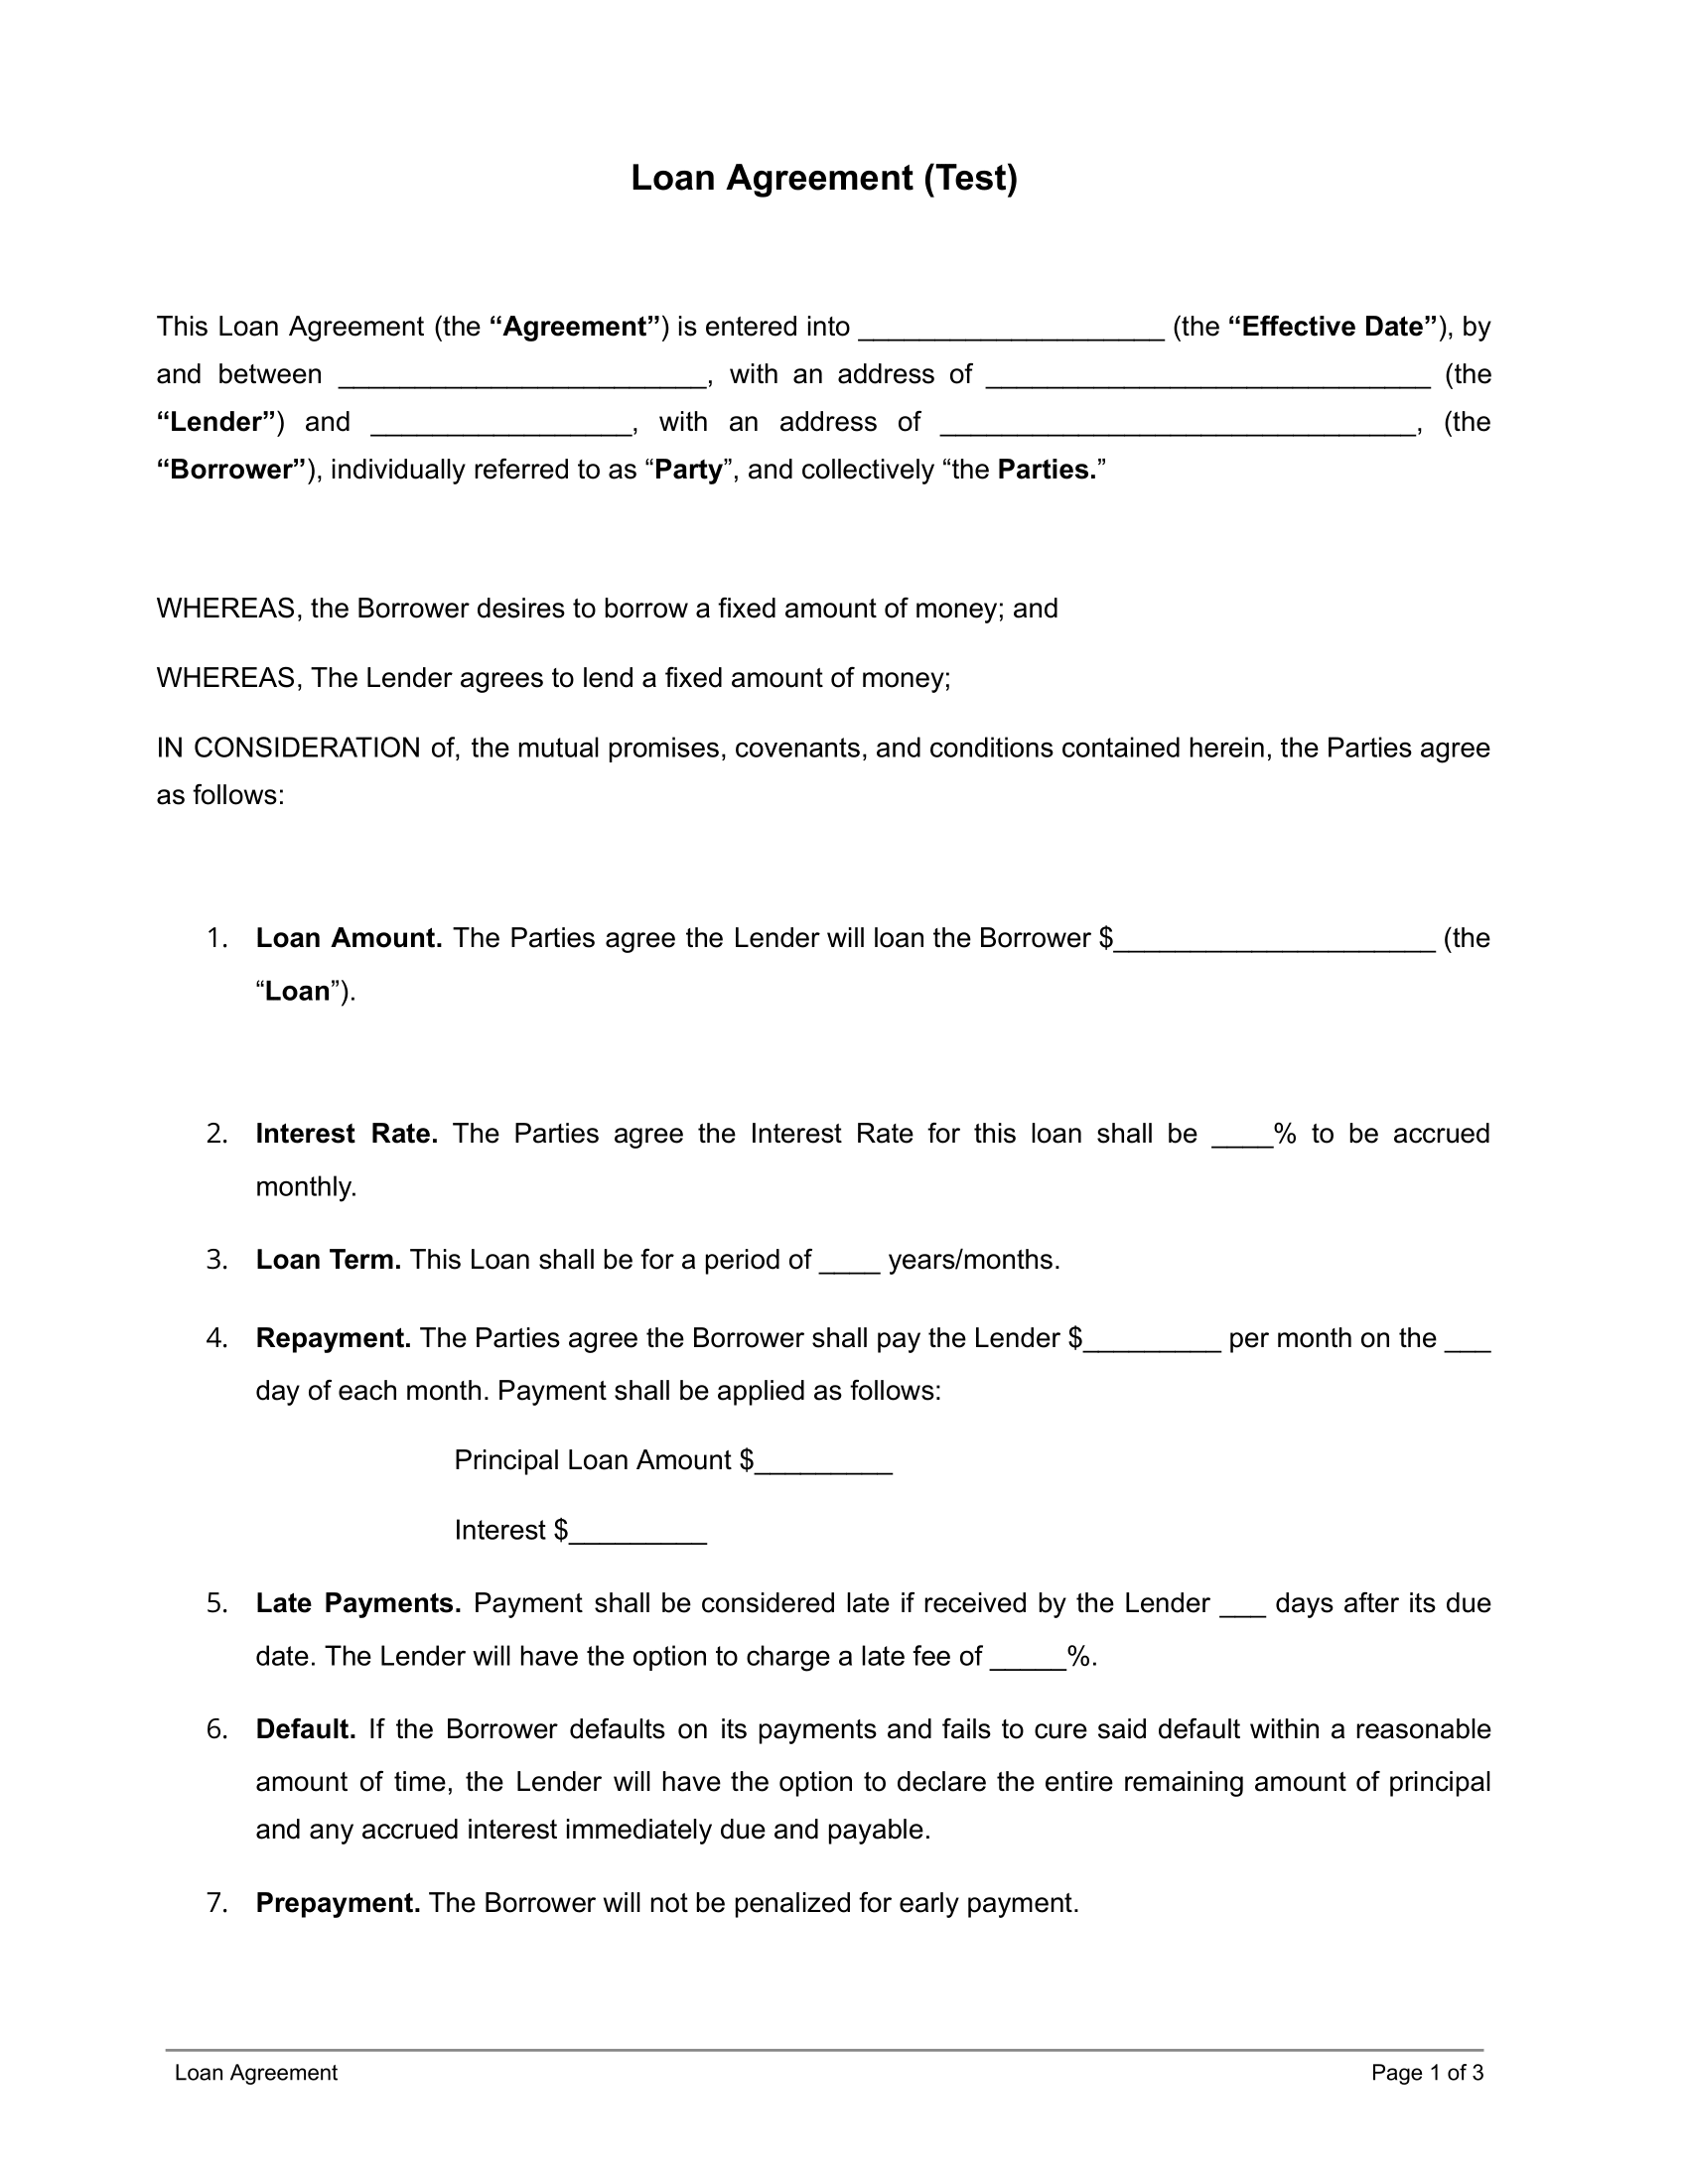 Loan Aggrement page 1